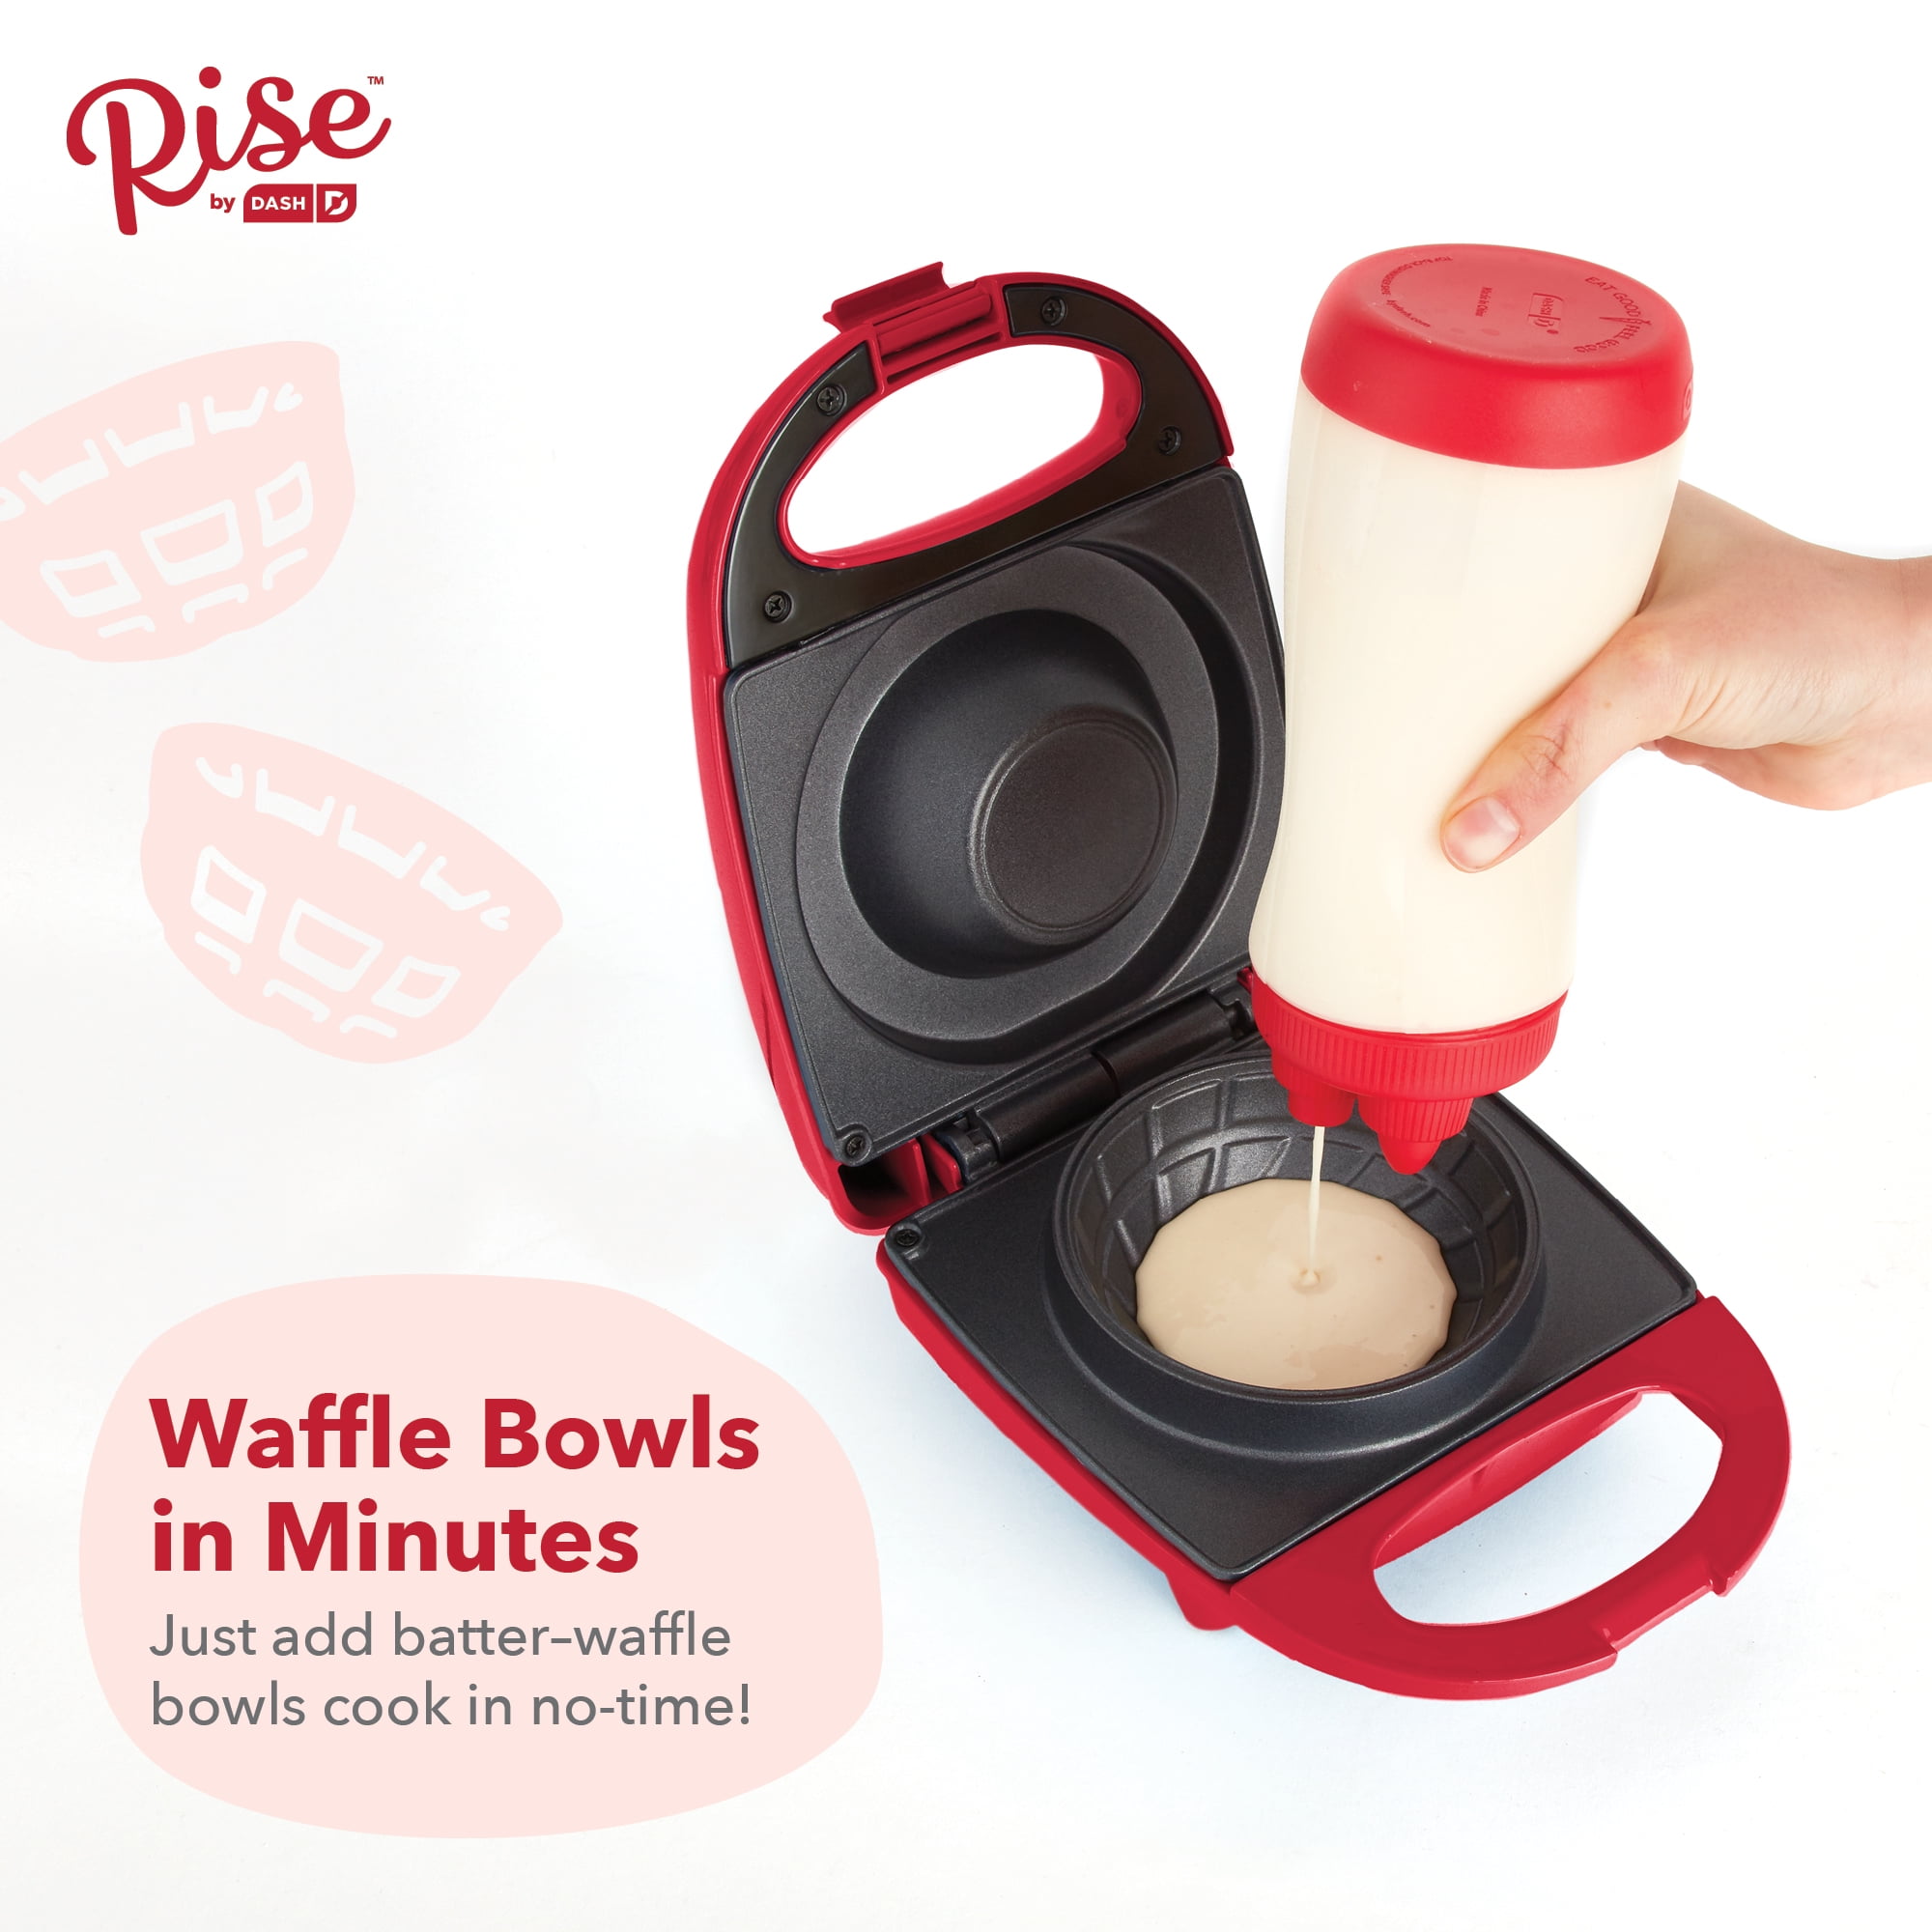 Delicious waffle bowl treats await with this Dash mini maker at just